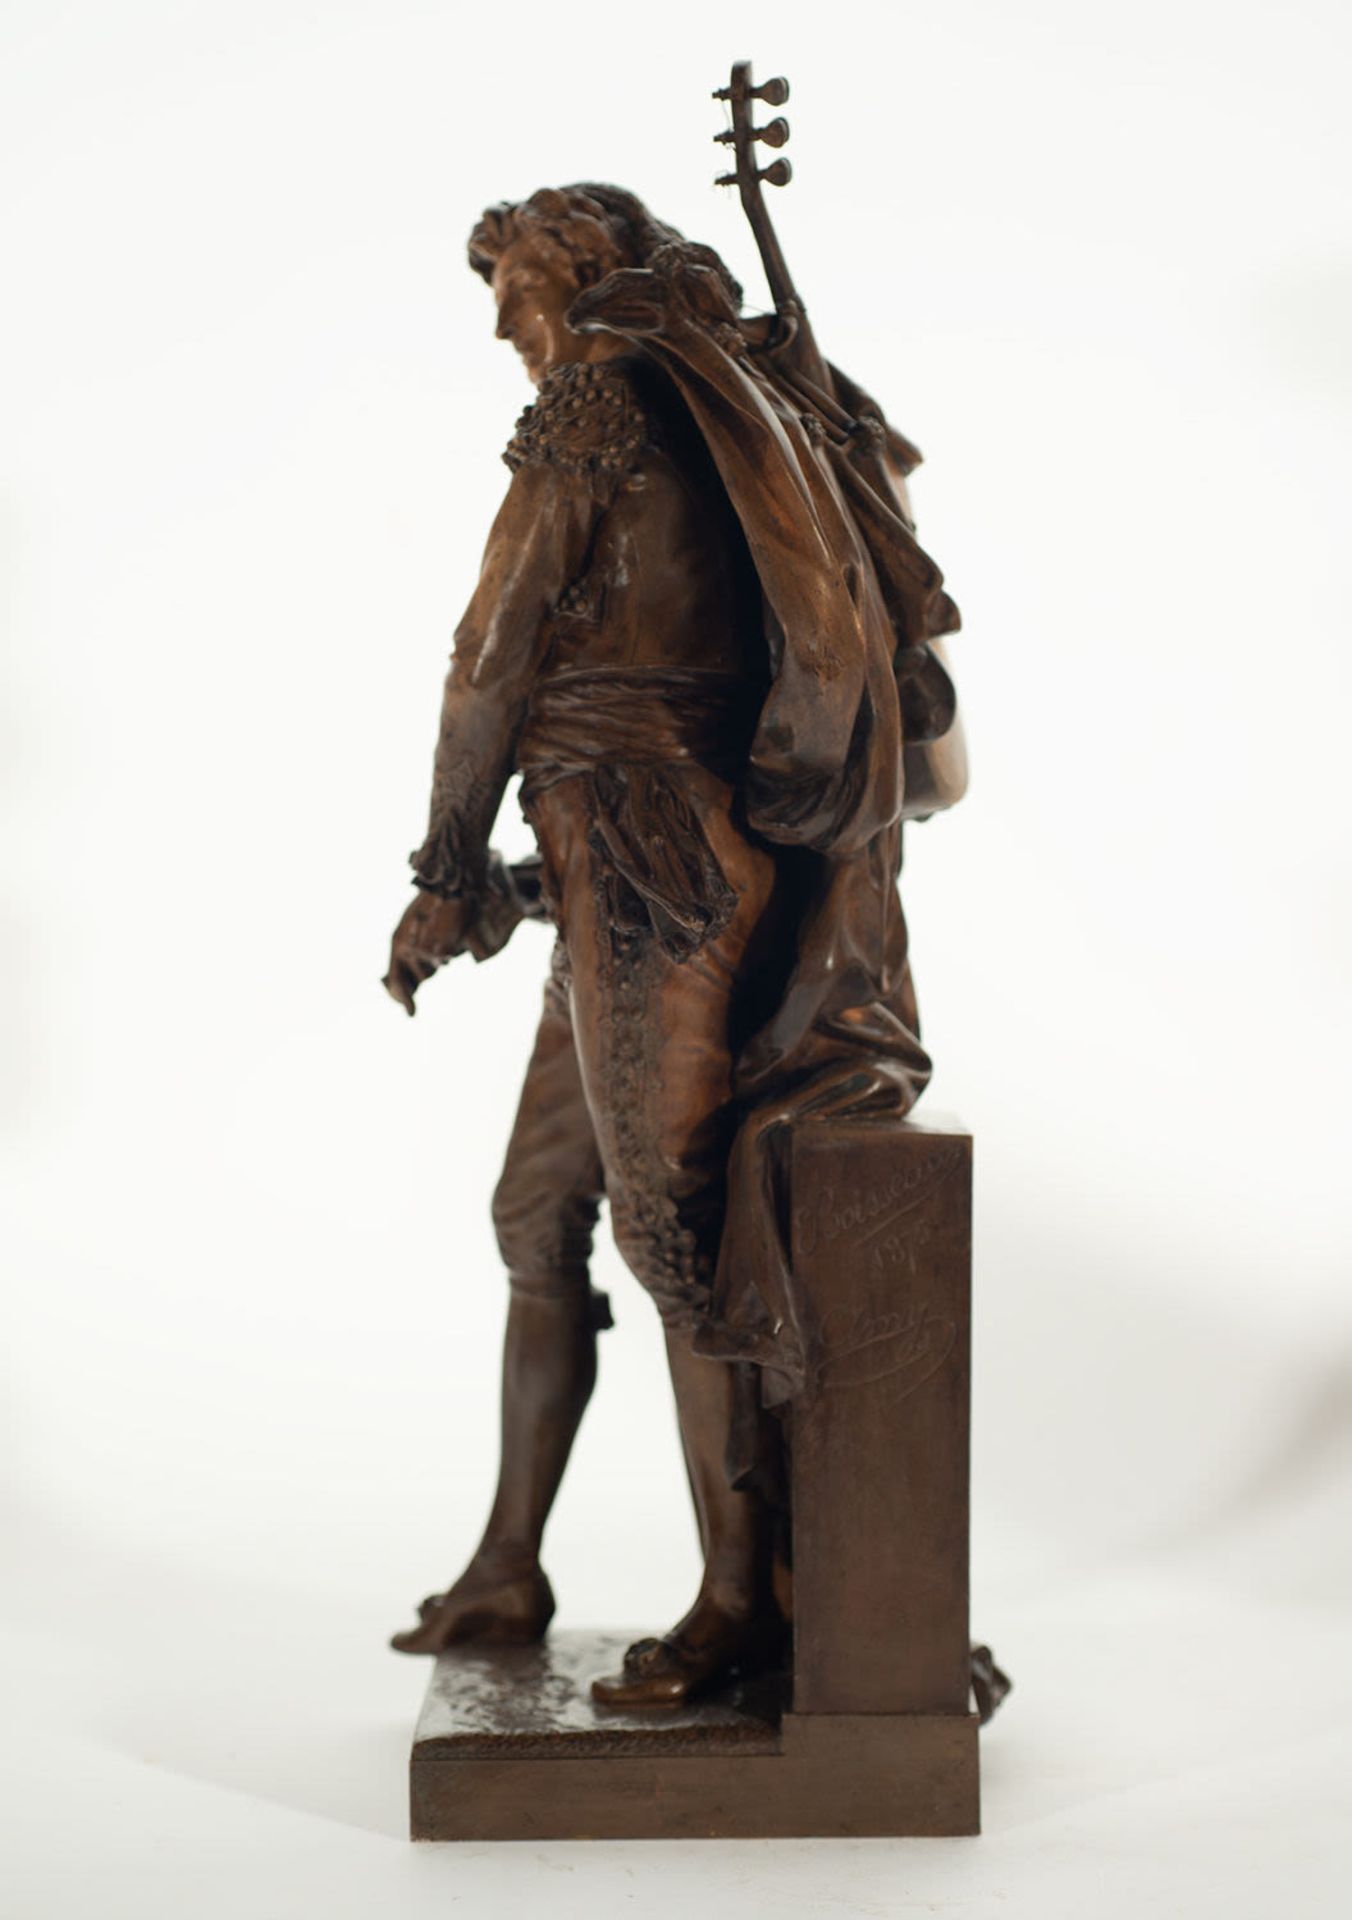 Bronze sculpture by Figaro, signed Boisseau, 1875. 19th century French school - Image 3 of 4